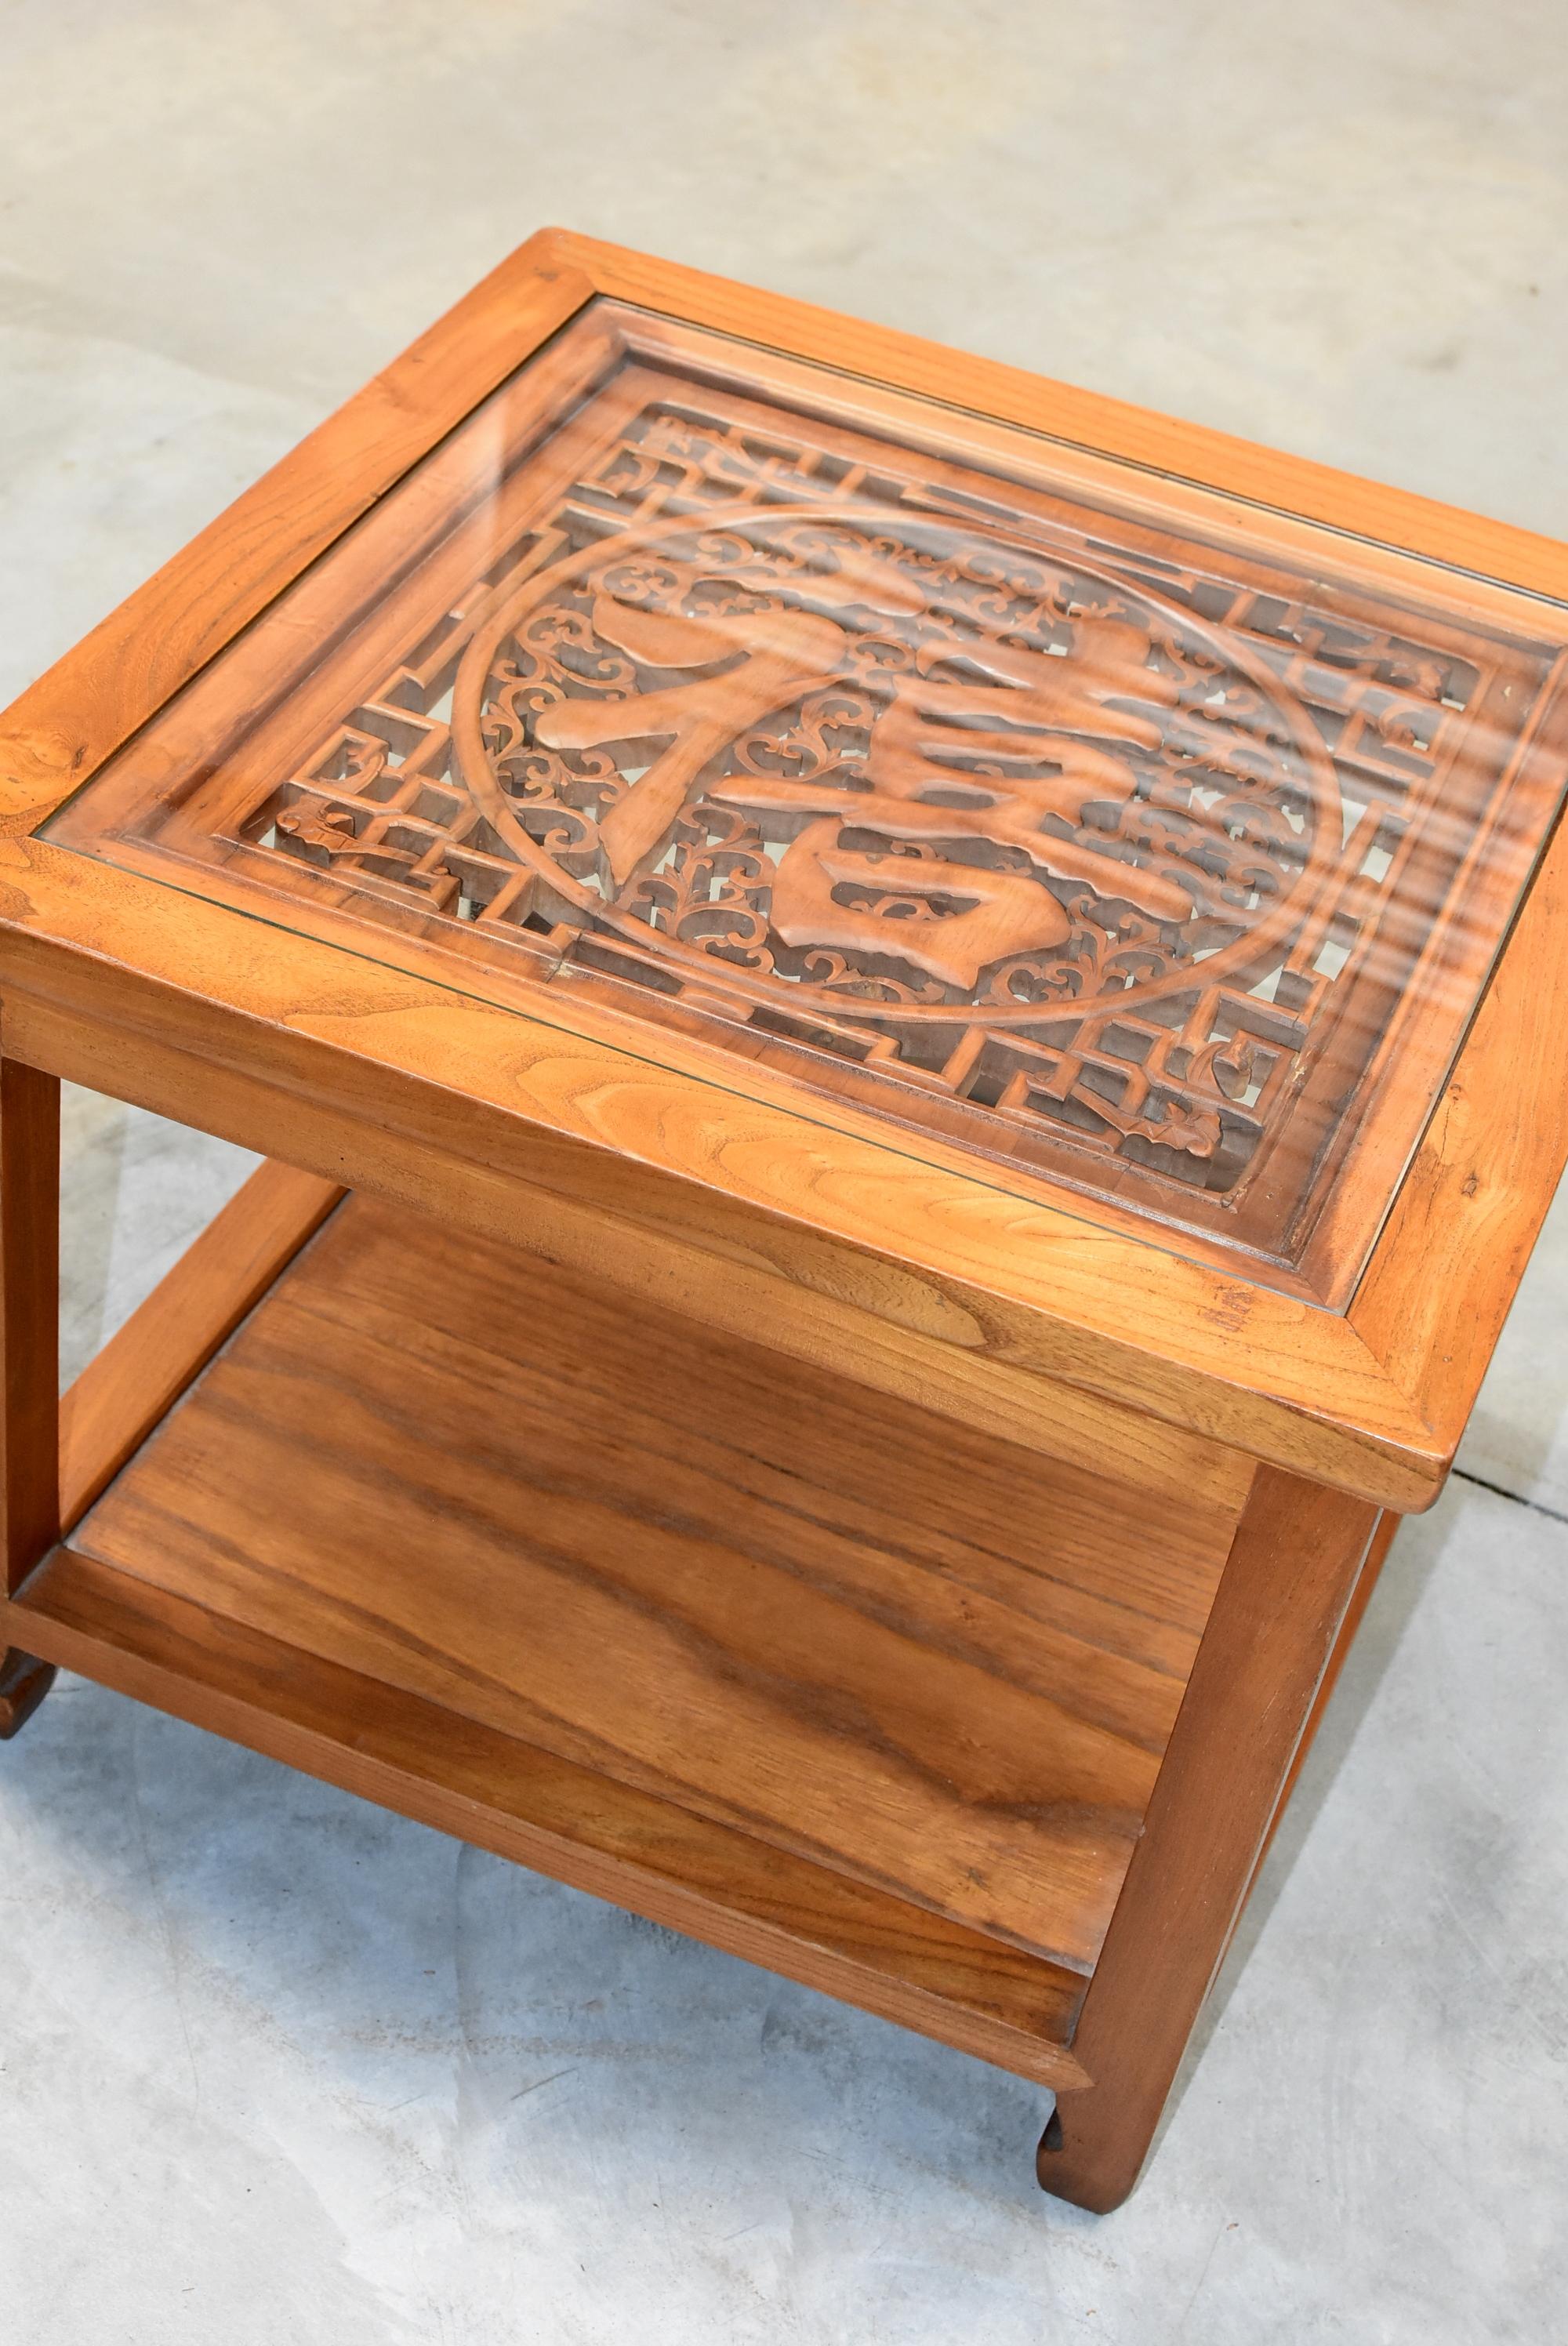 carved wood table top